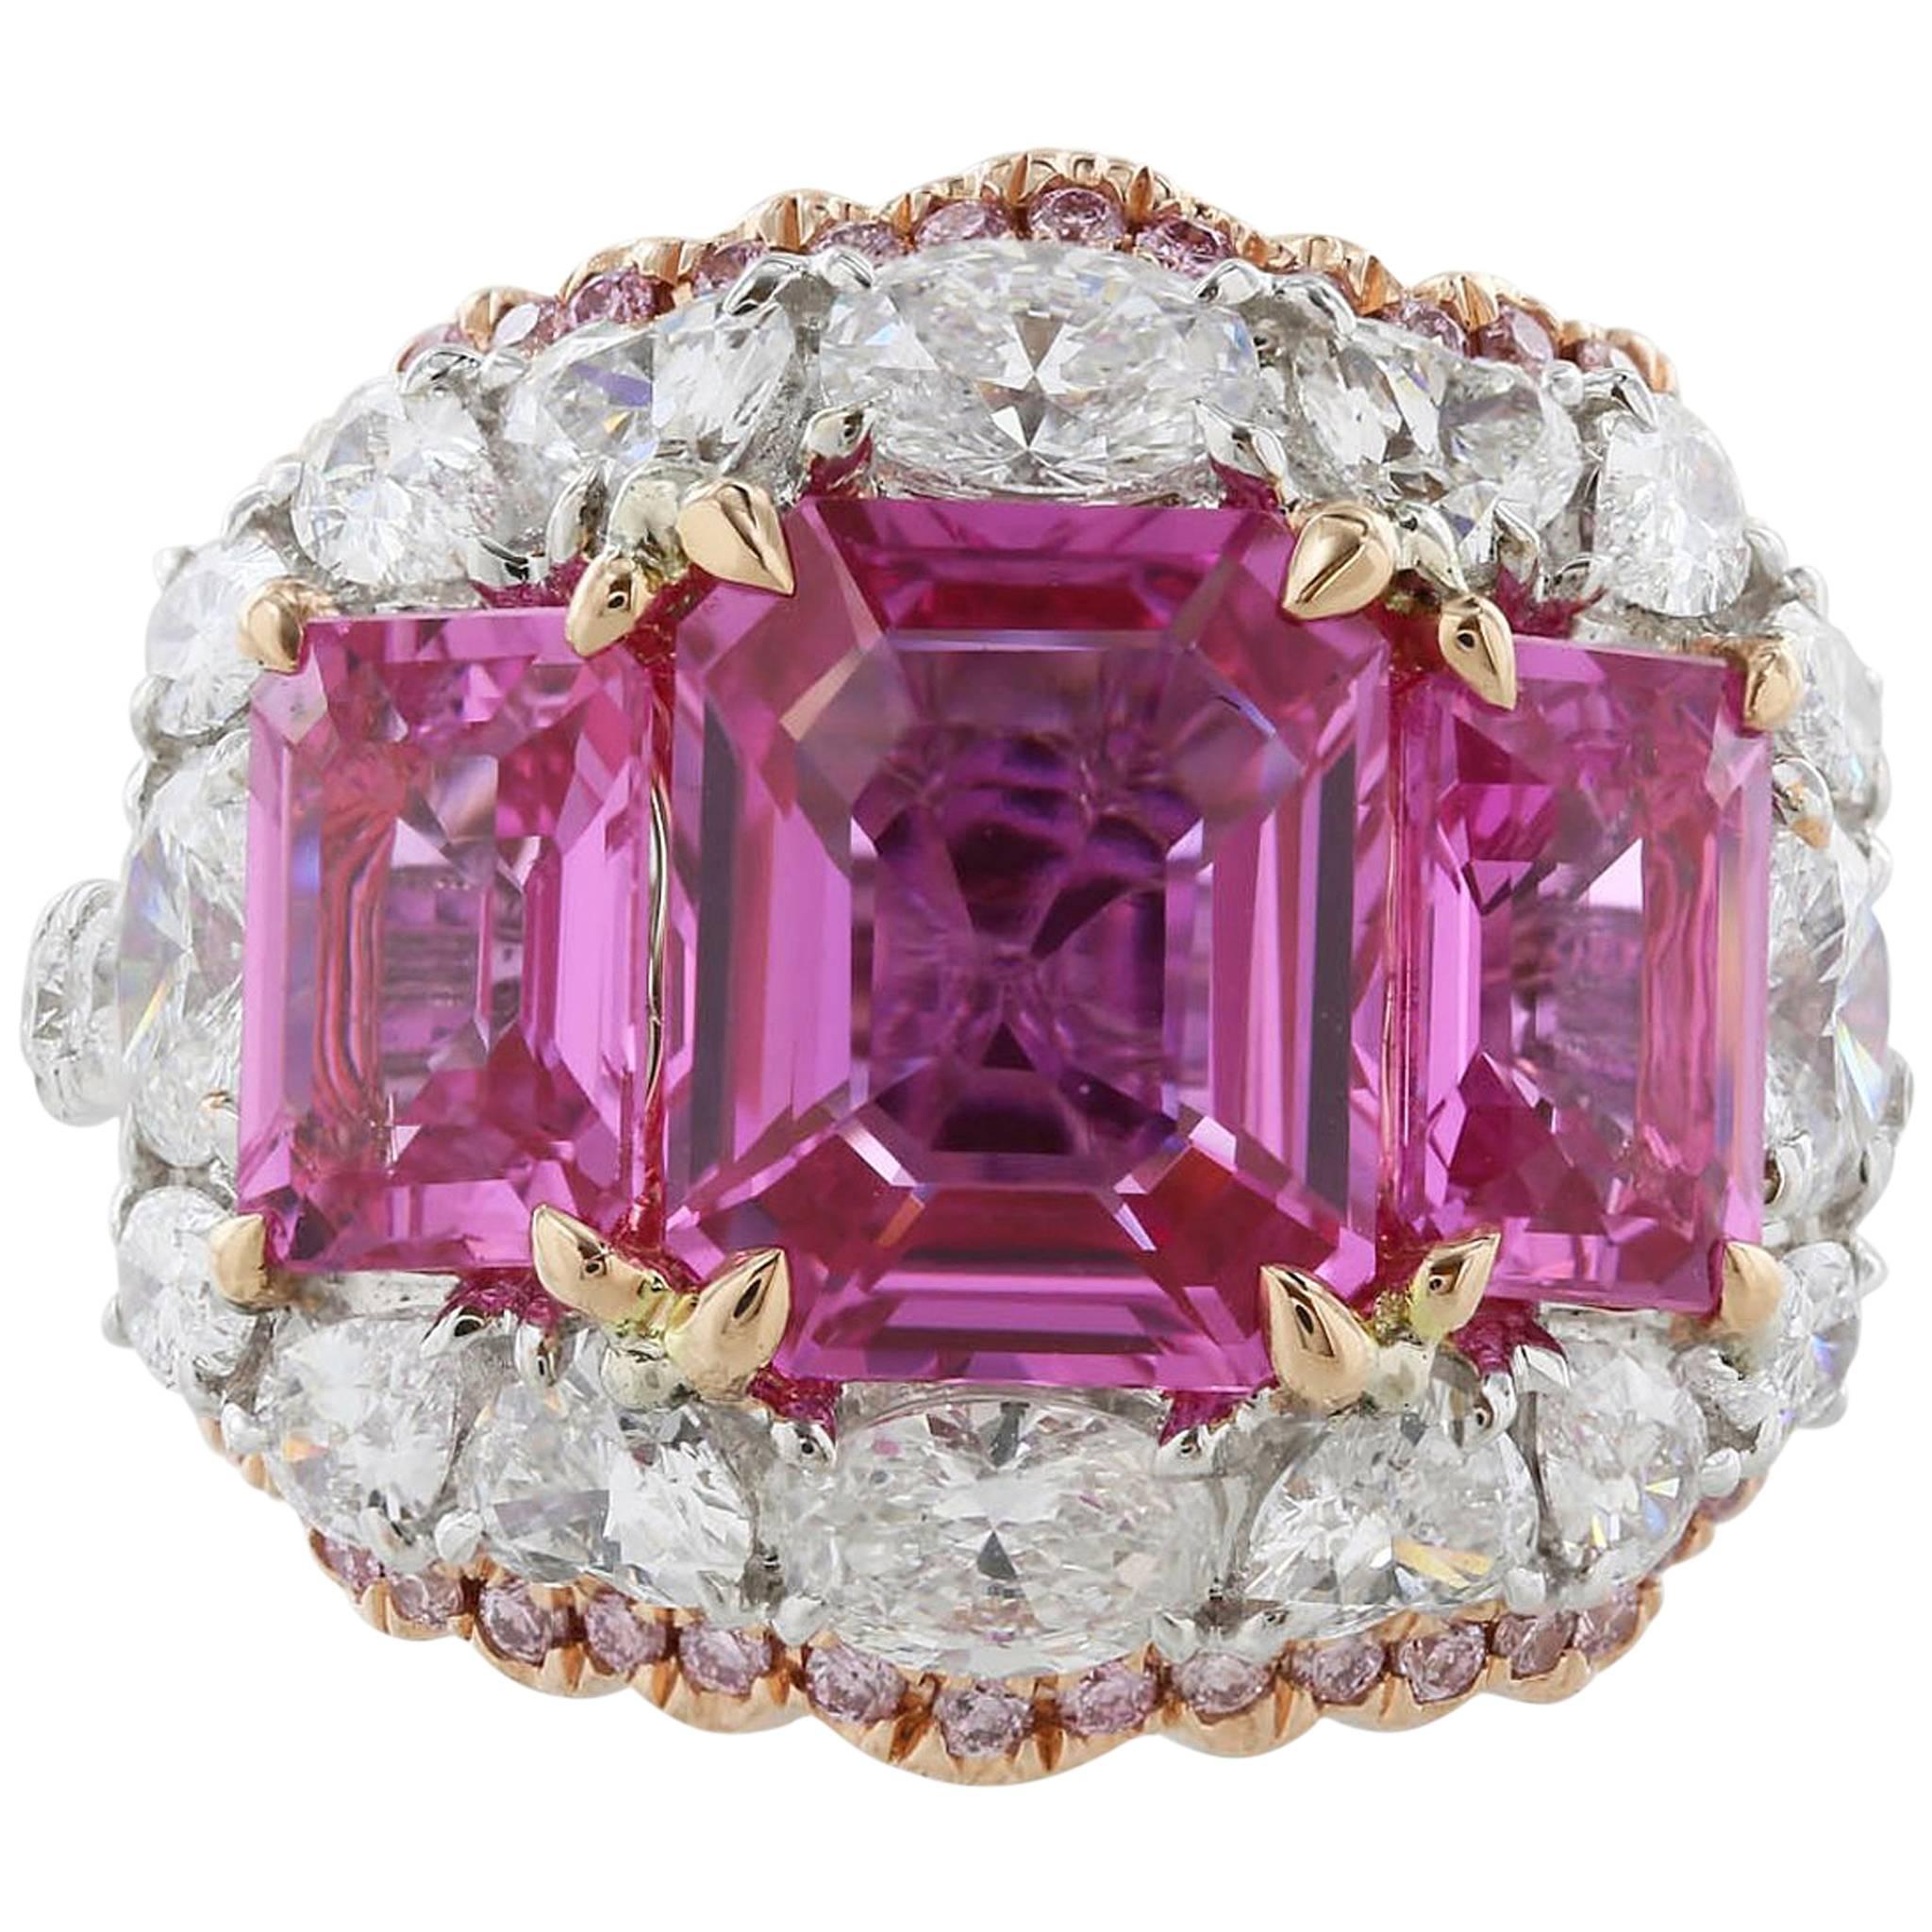 5.34 Carat Unheated Pink Sapphire Diamond Cluster Ring For Sale